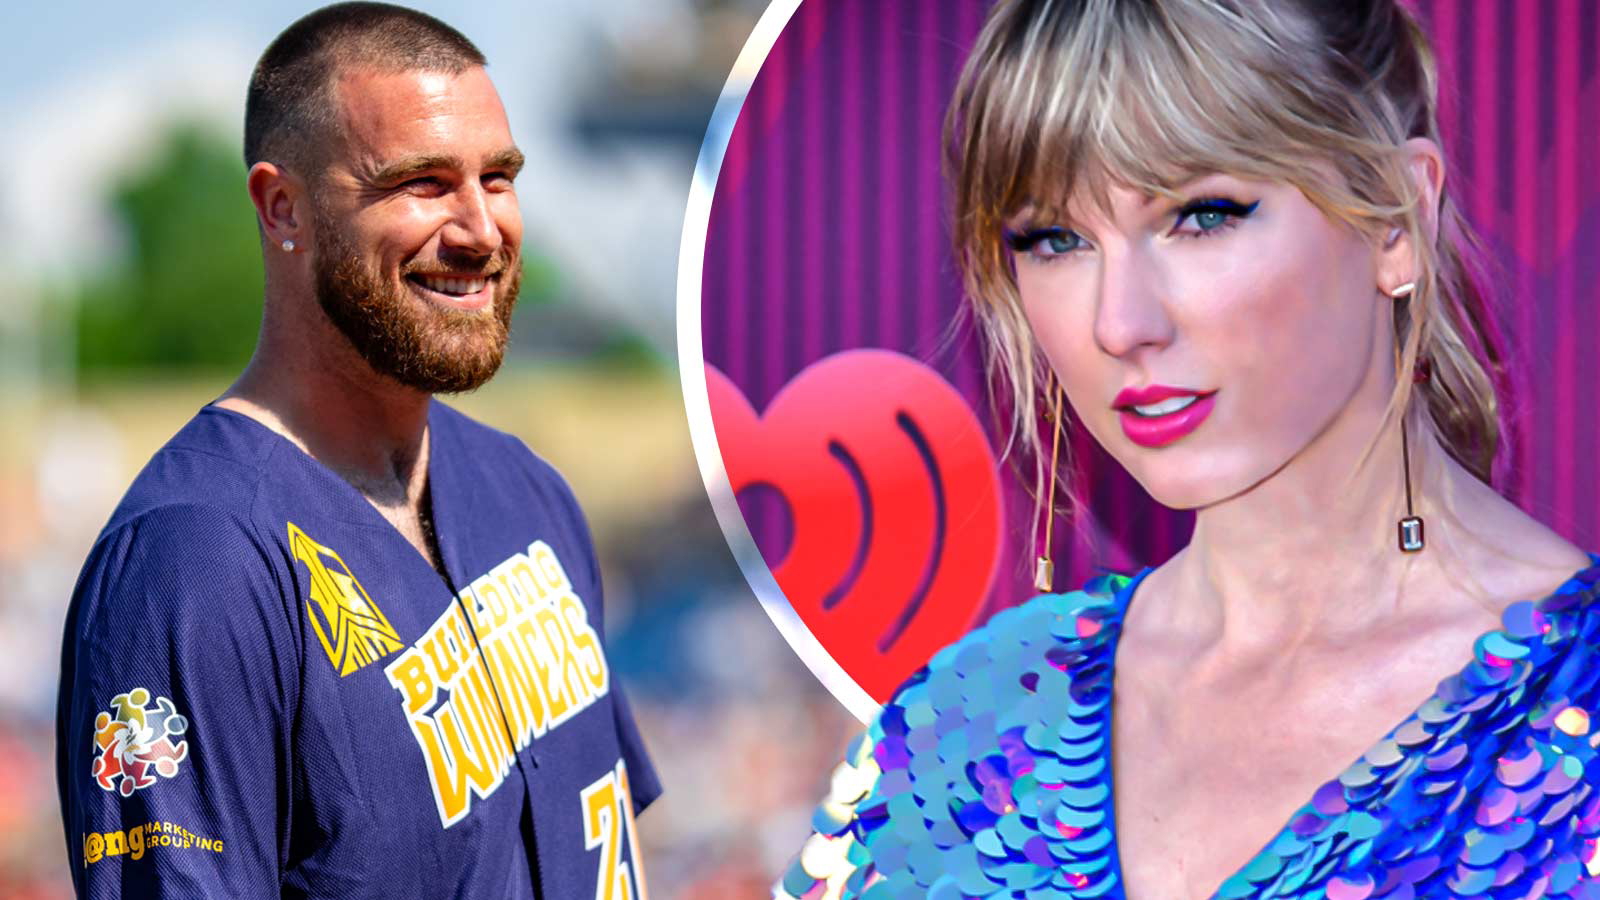 “They’re eager to walk down the aisle”: Taylor Swift and Travis Kelce Are Planning Their Dream Wedding But Singer’s Dad Has Proposed an Ironclad Prenup – Report